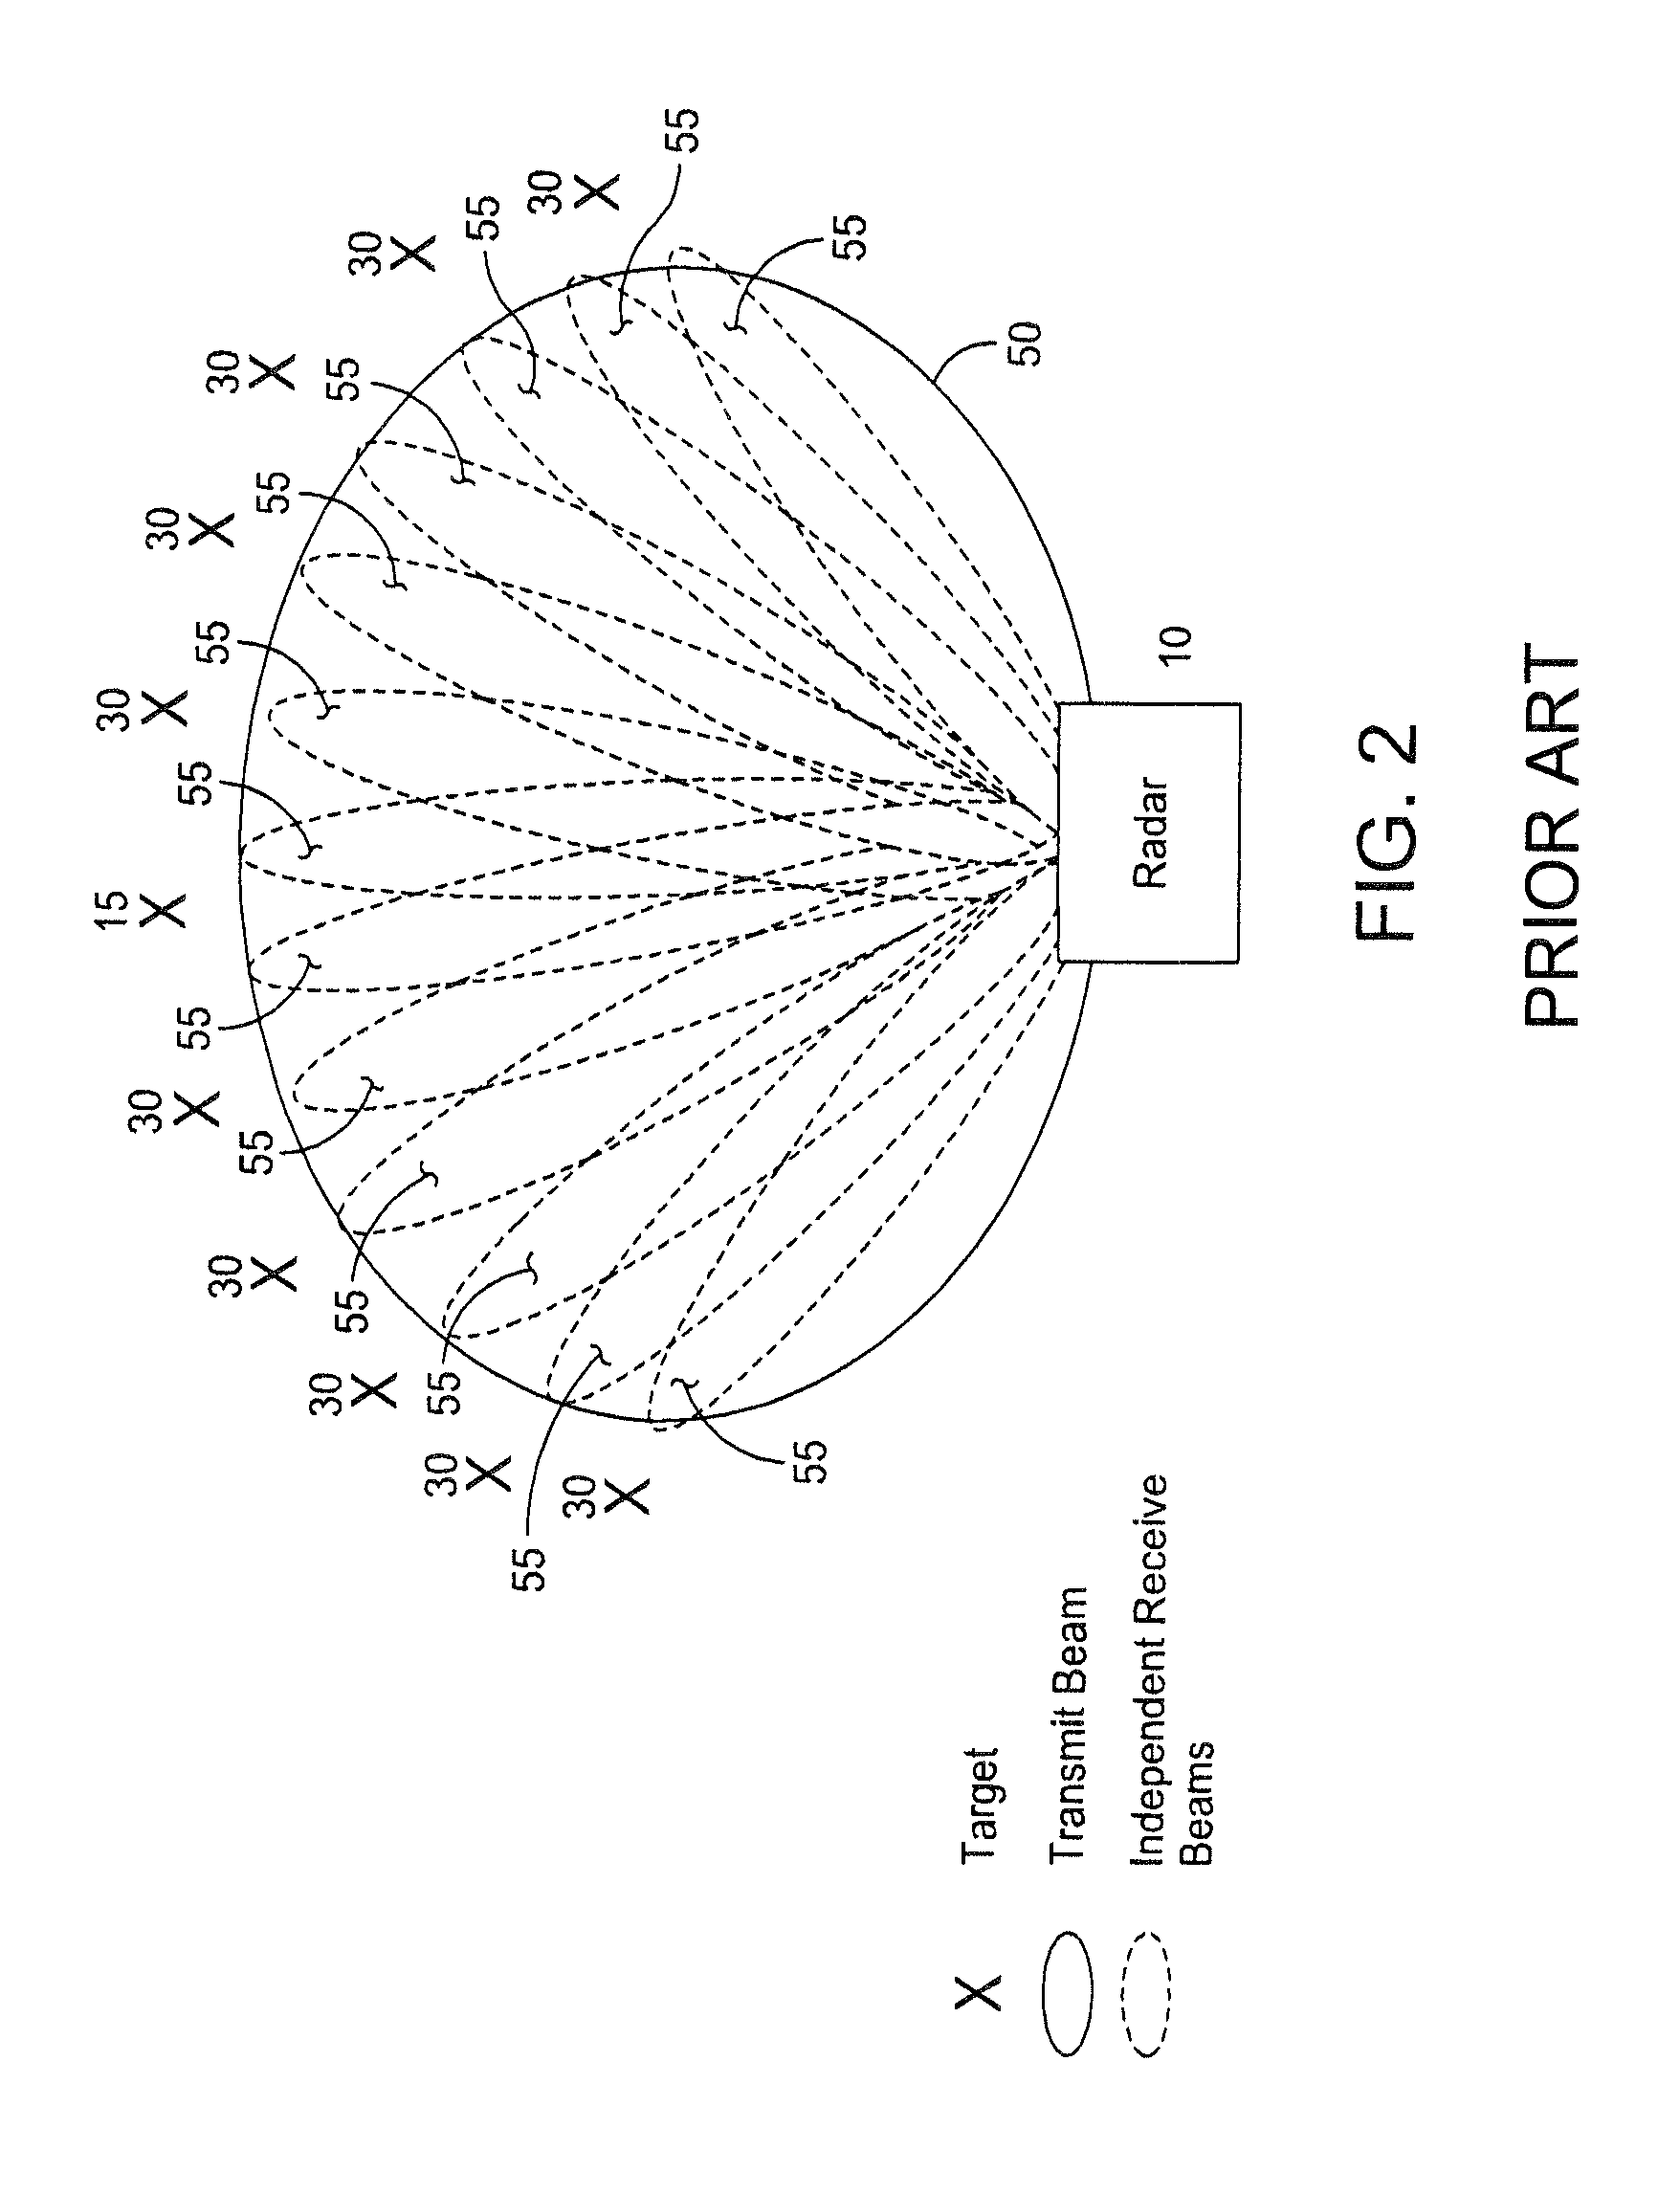 Multiple simultaneous transmit track beams using phase-only pattern synthesis